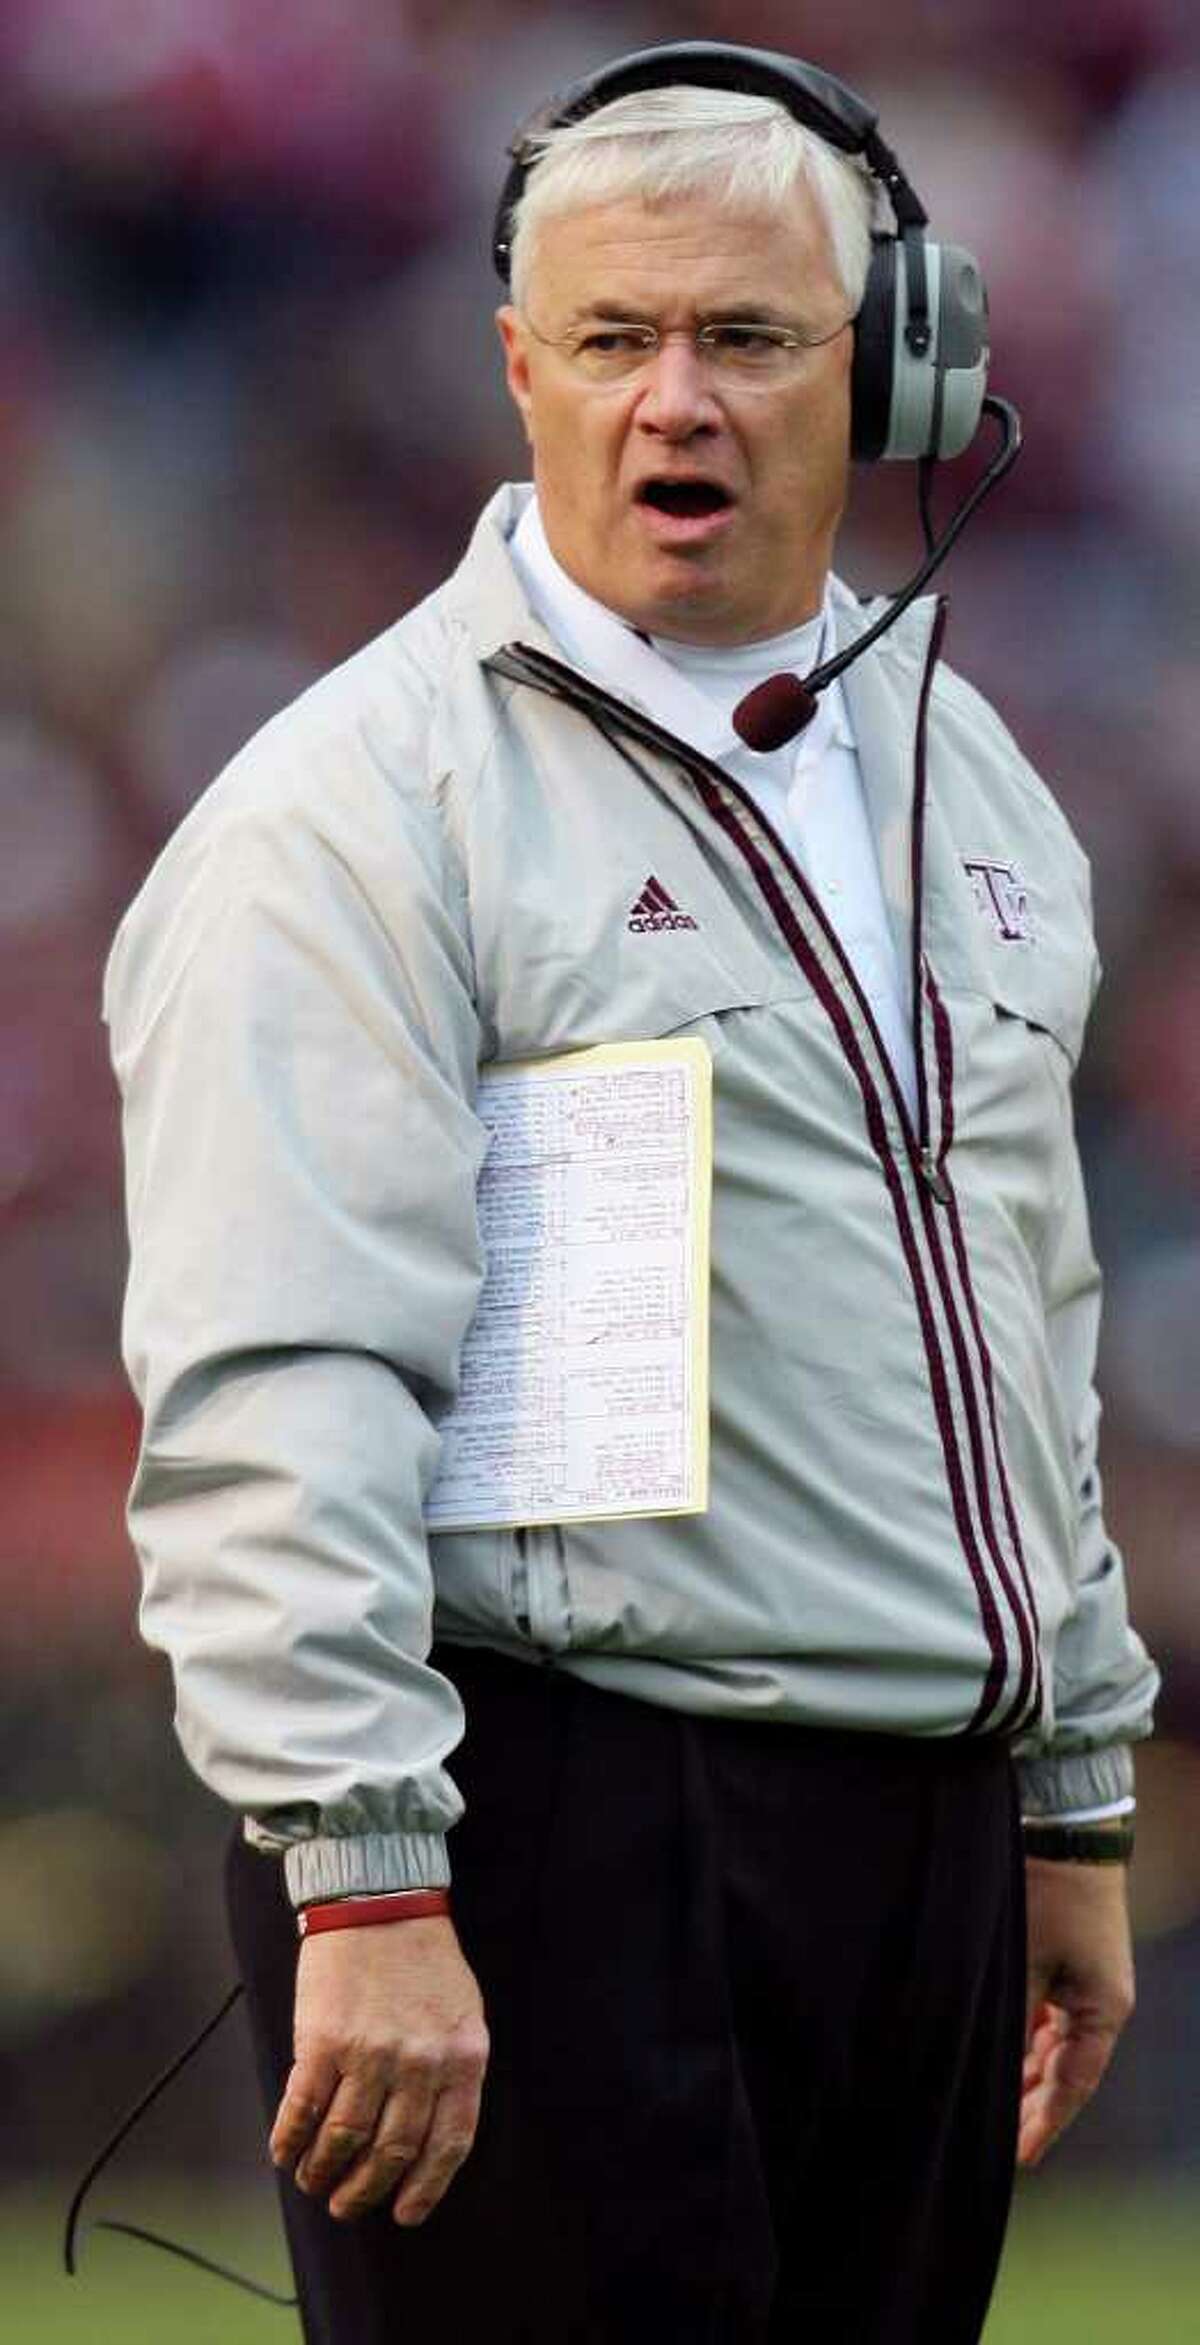 FOR SPORTS - Texas A&M's headcoach Dennis Franchione walks the sidelines during the game against Texas Friday Nov. 23, 2007 at Kyle Field in College Station, Tx. Texas A&M won 38-30.